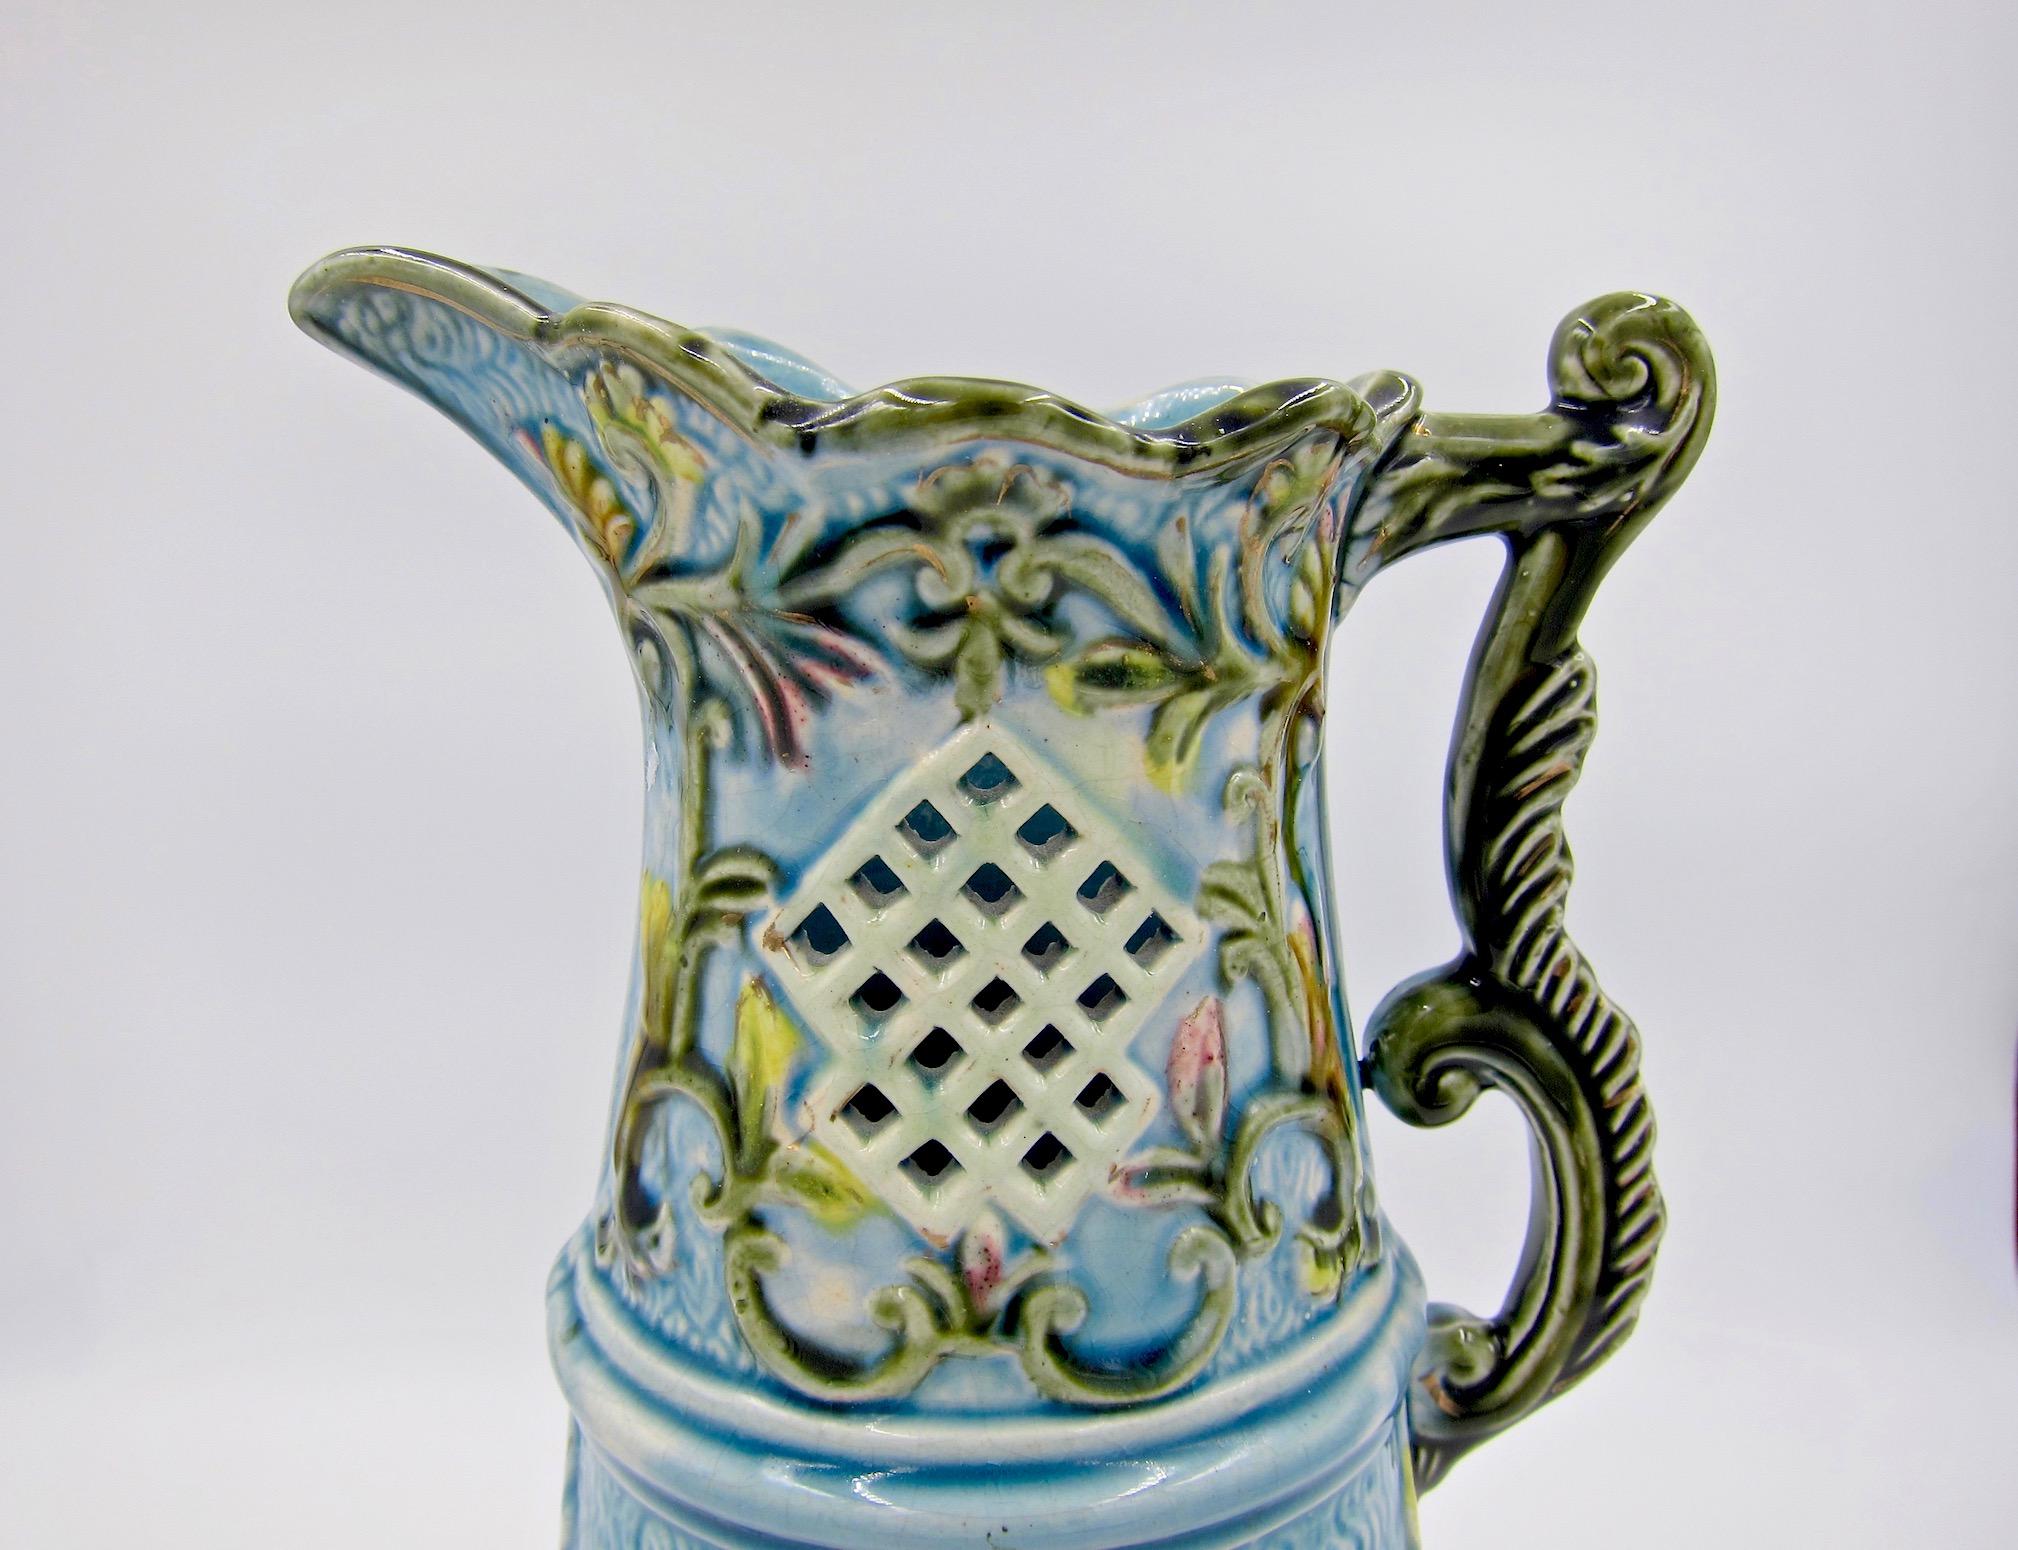 European Antique Continental Hand-Painted Majolica Pitcher Vase